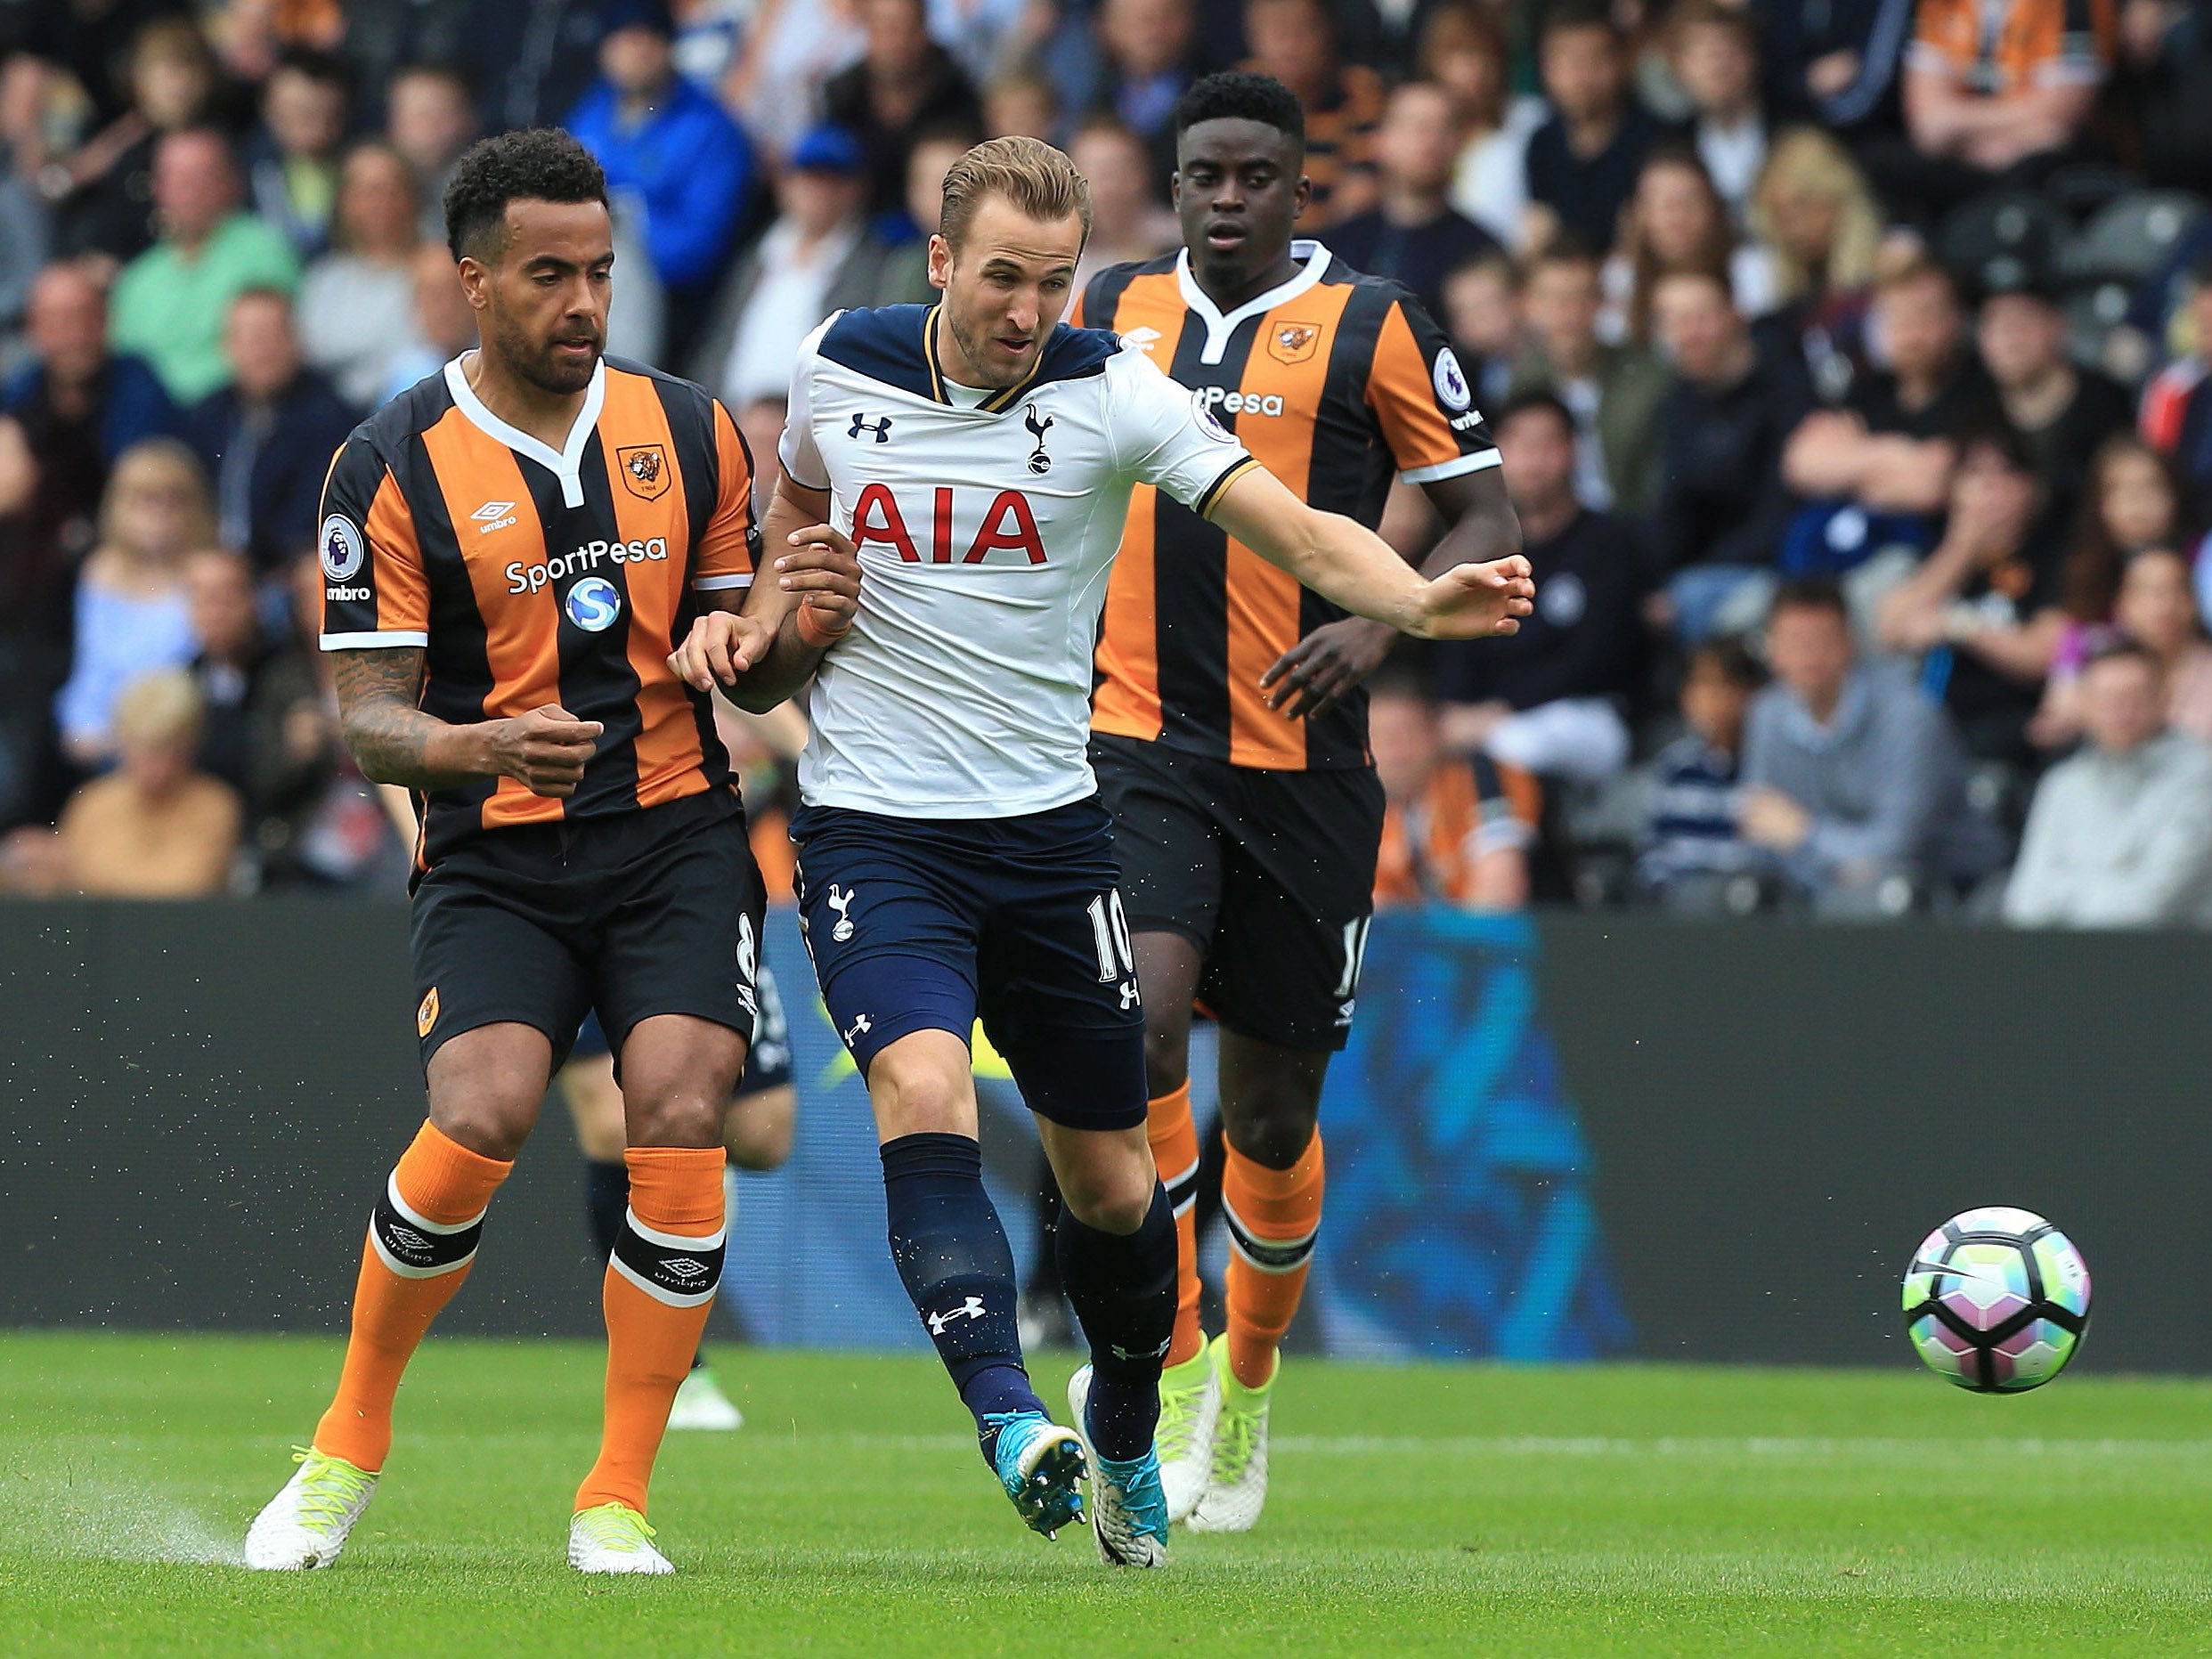 Kane is on course for the Golden Boot